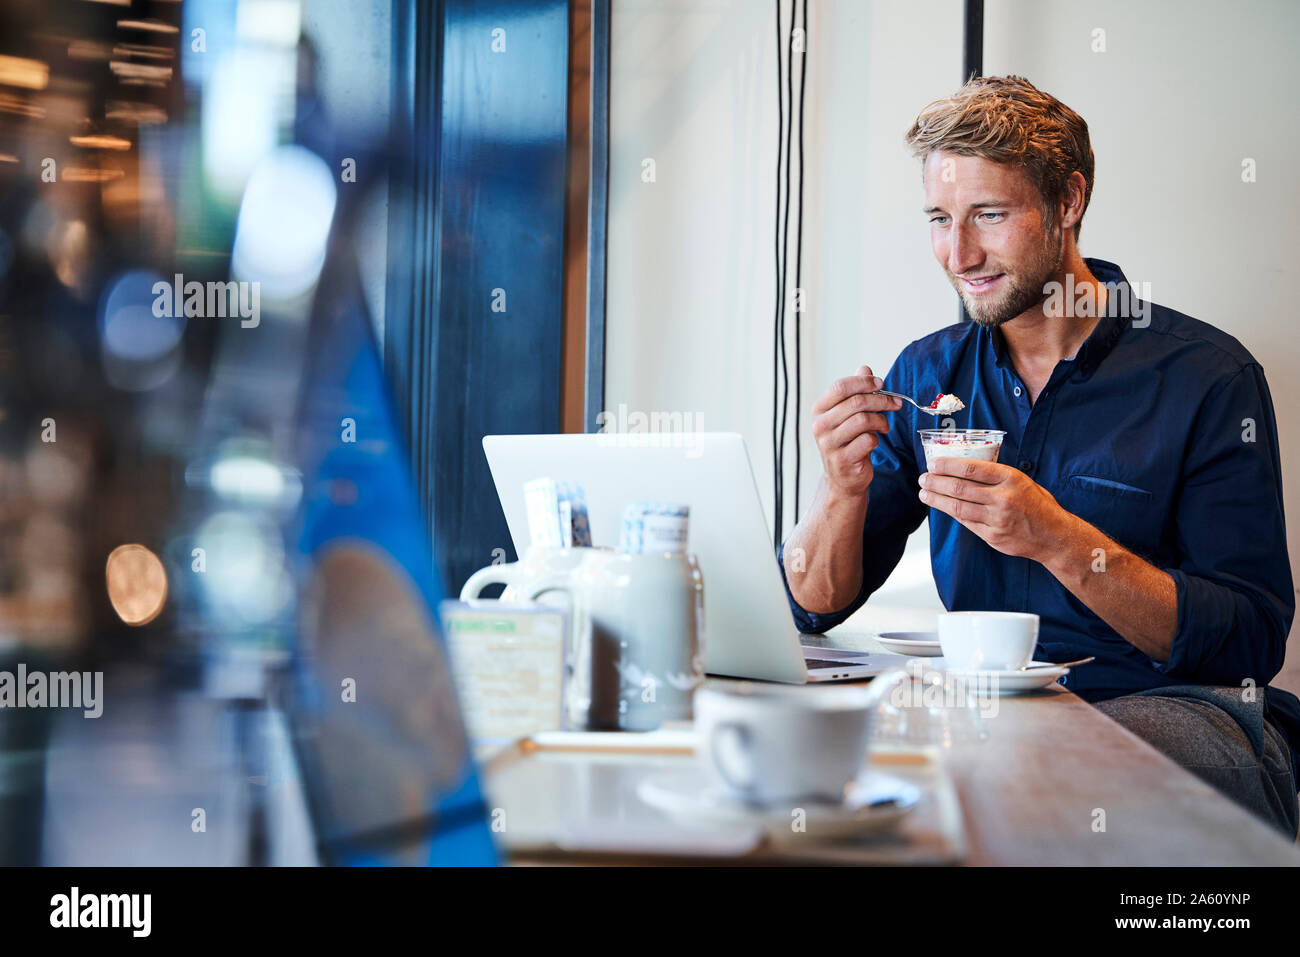 Young businessman eating and using laptop in a cafe Stock Photo